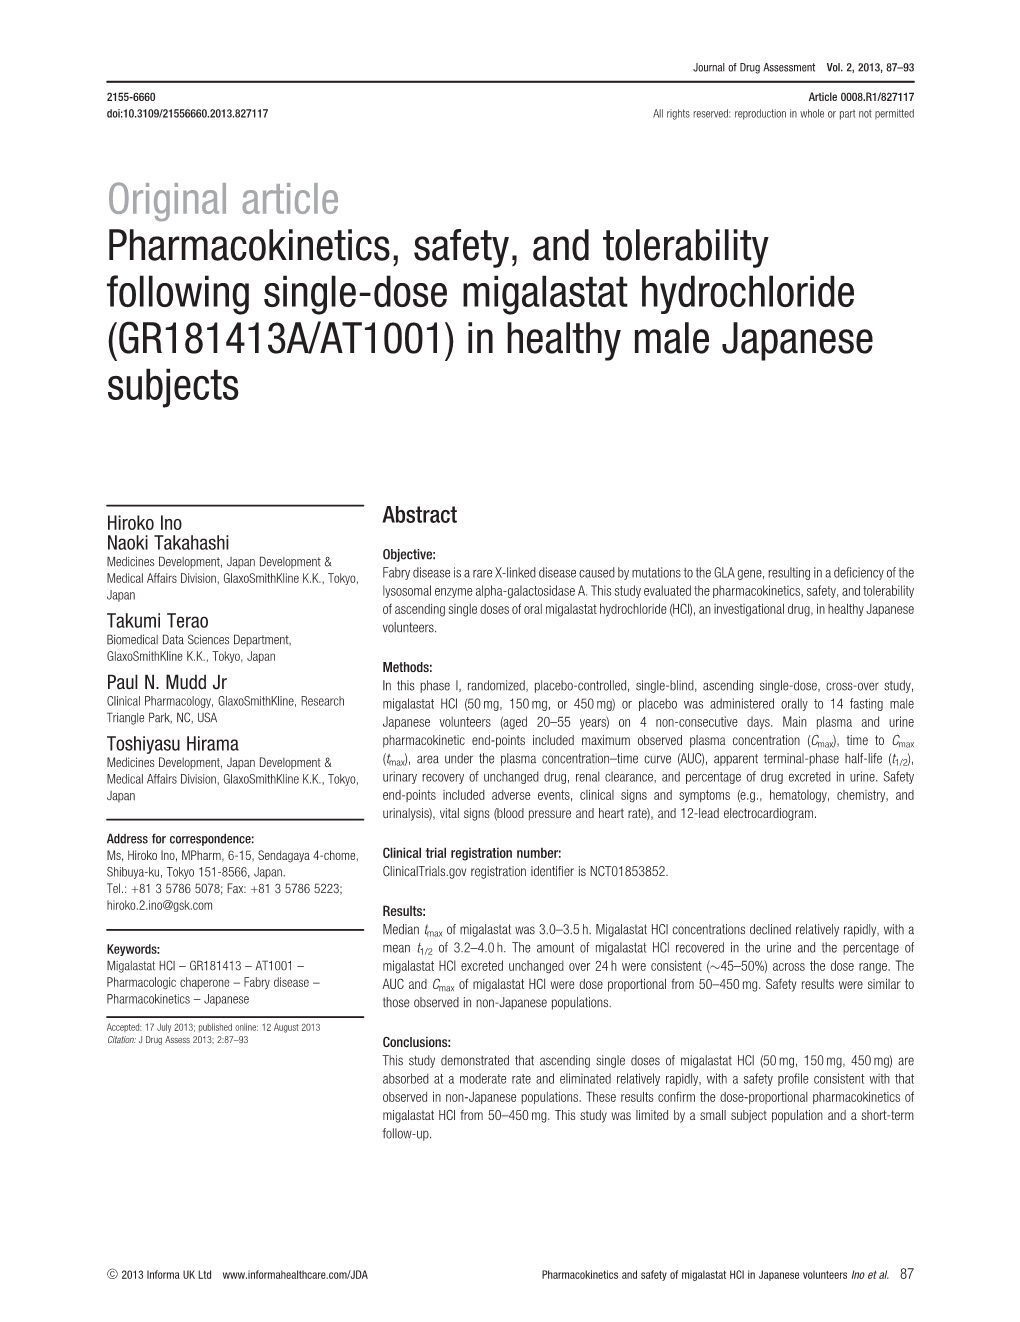 (GR181413A/AT1001) in Healthy Male Japanese Subjects